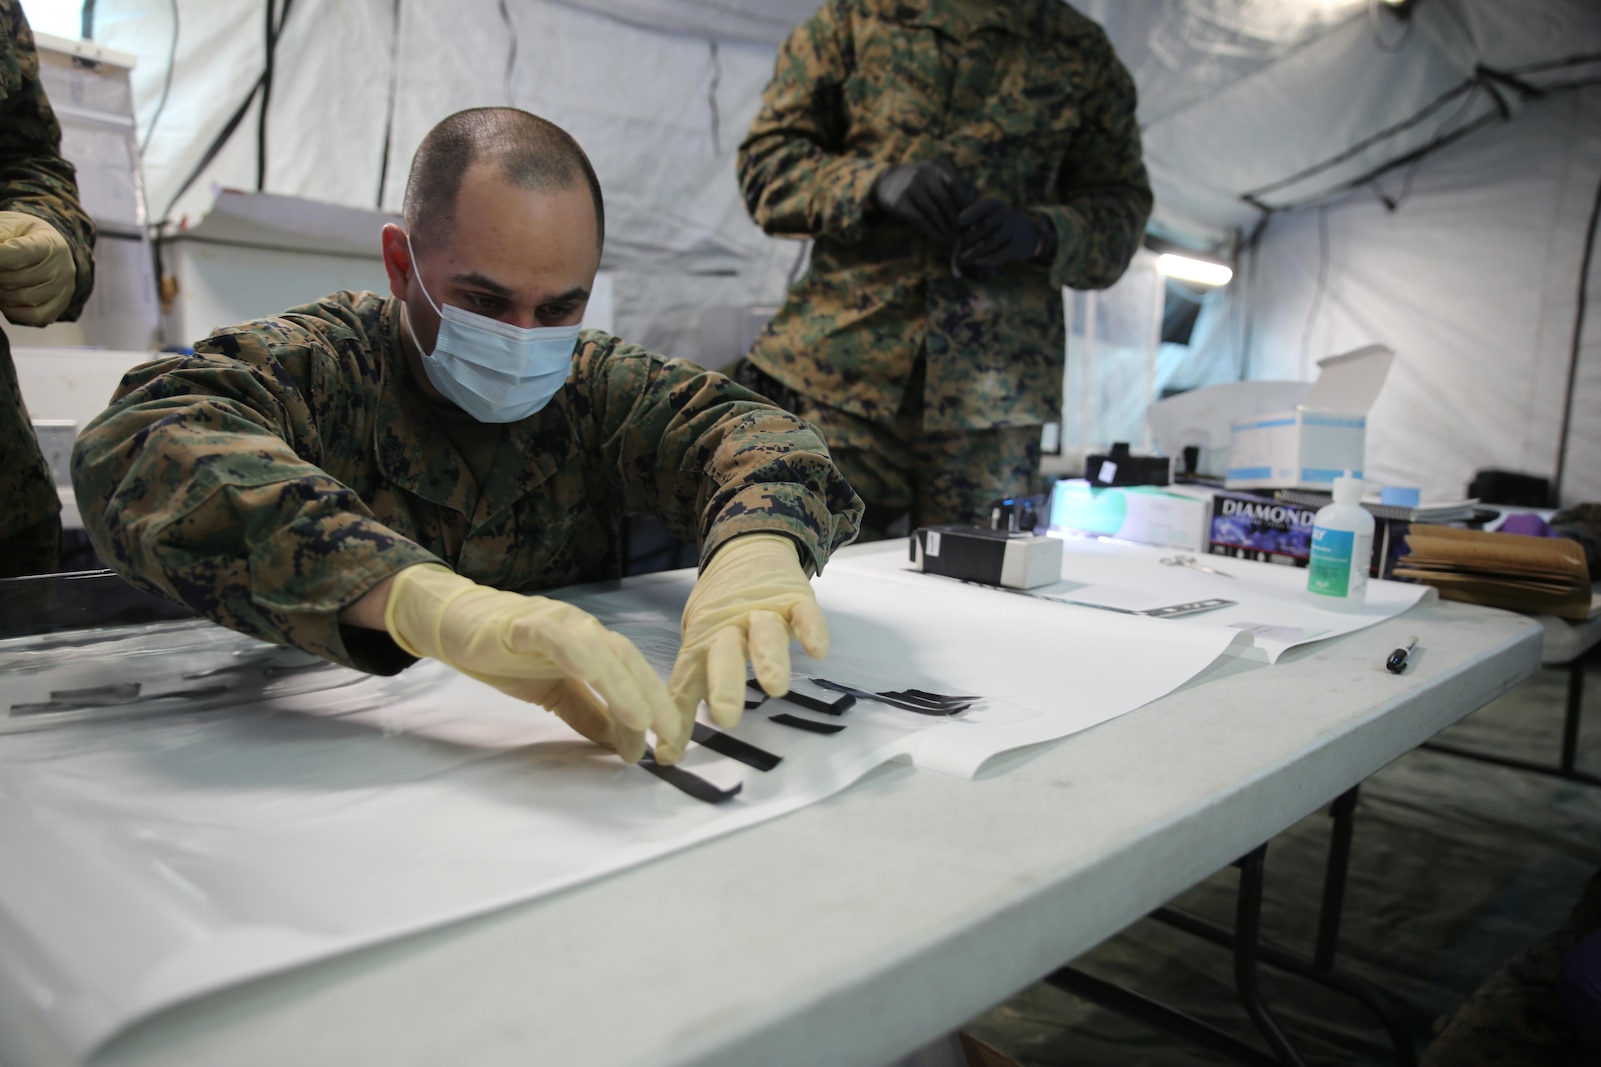 Sgt. Alberto Camacho, military policeman for Charlie Company, 2nd Law Enforcement Battalion, separates evidence without fingerprints during Tactical Site Exploitation training at Camp Lejeune, N.C., March 3, 2016. The training emphasizes the importance of leaving the evidence in pristine condition to ensure they get the most accurate intelligence necessary to identify the enemies. (U.S. Marine Corps photo by Lance Cpl. Samuel Guerra/Released)